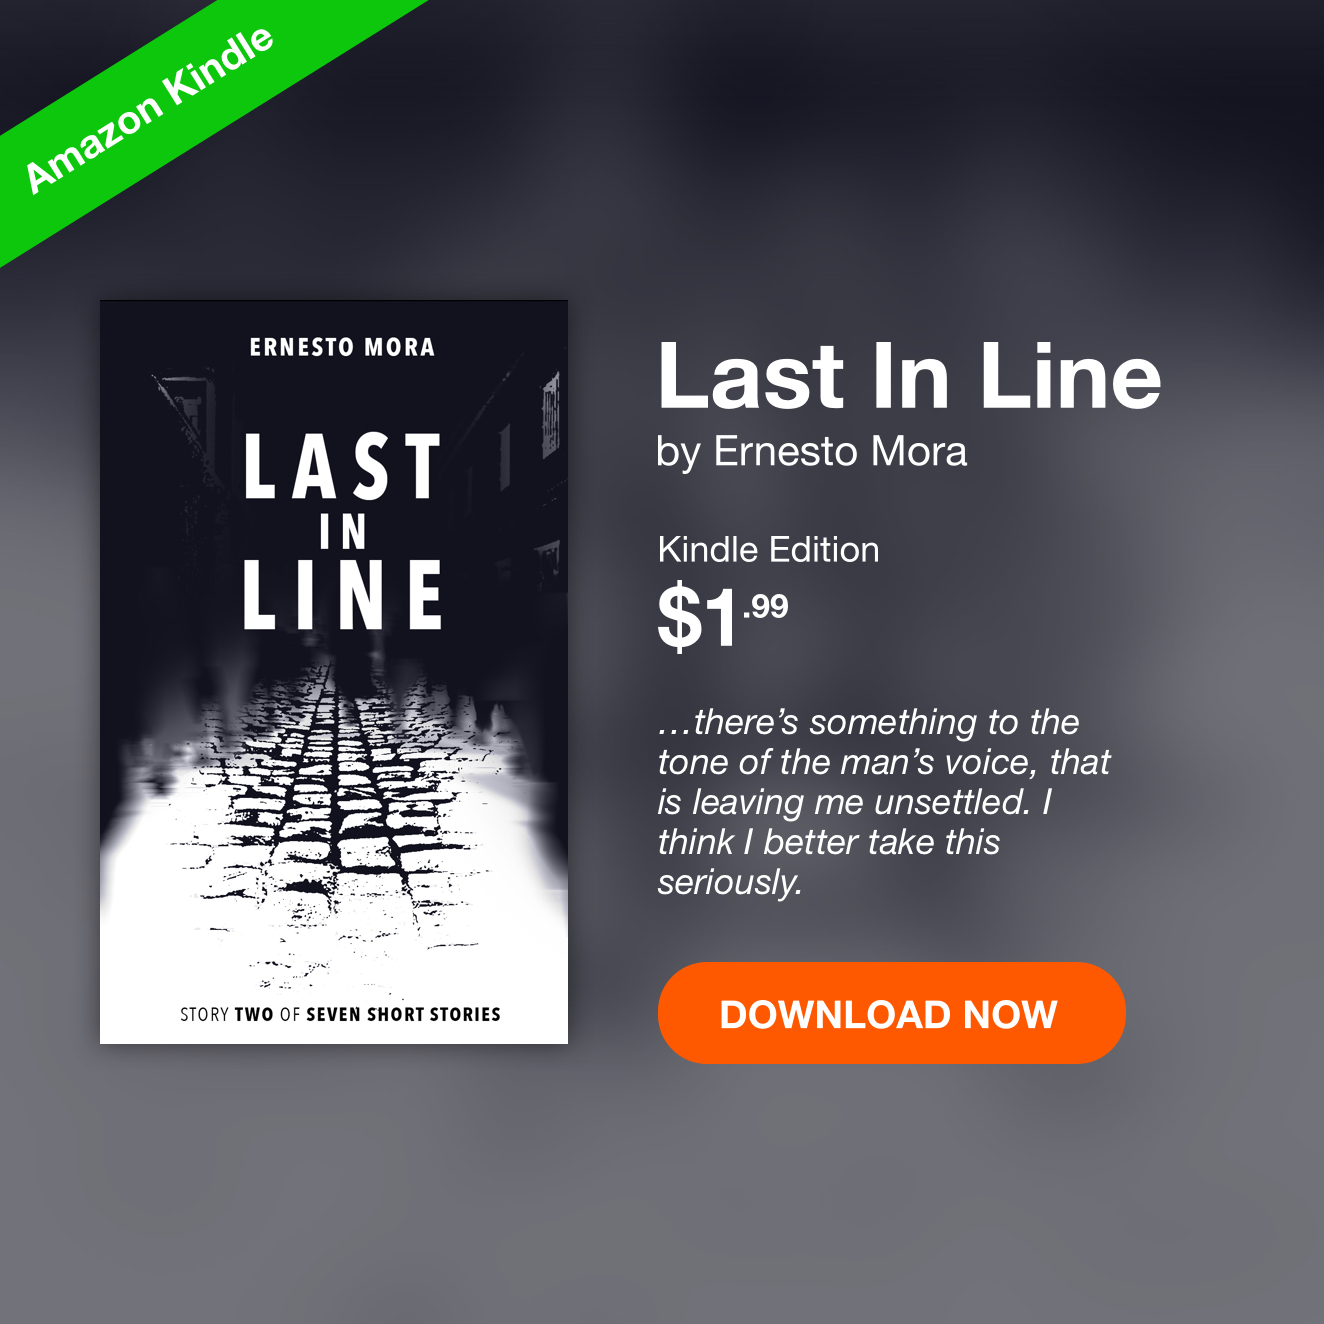 Last in Line by Ernesto Mora Download for Kindle